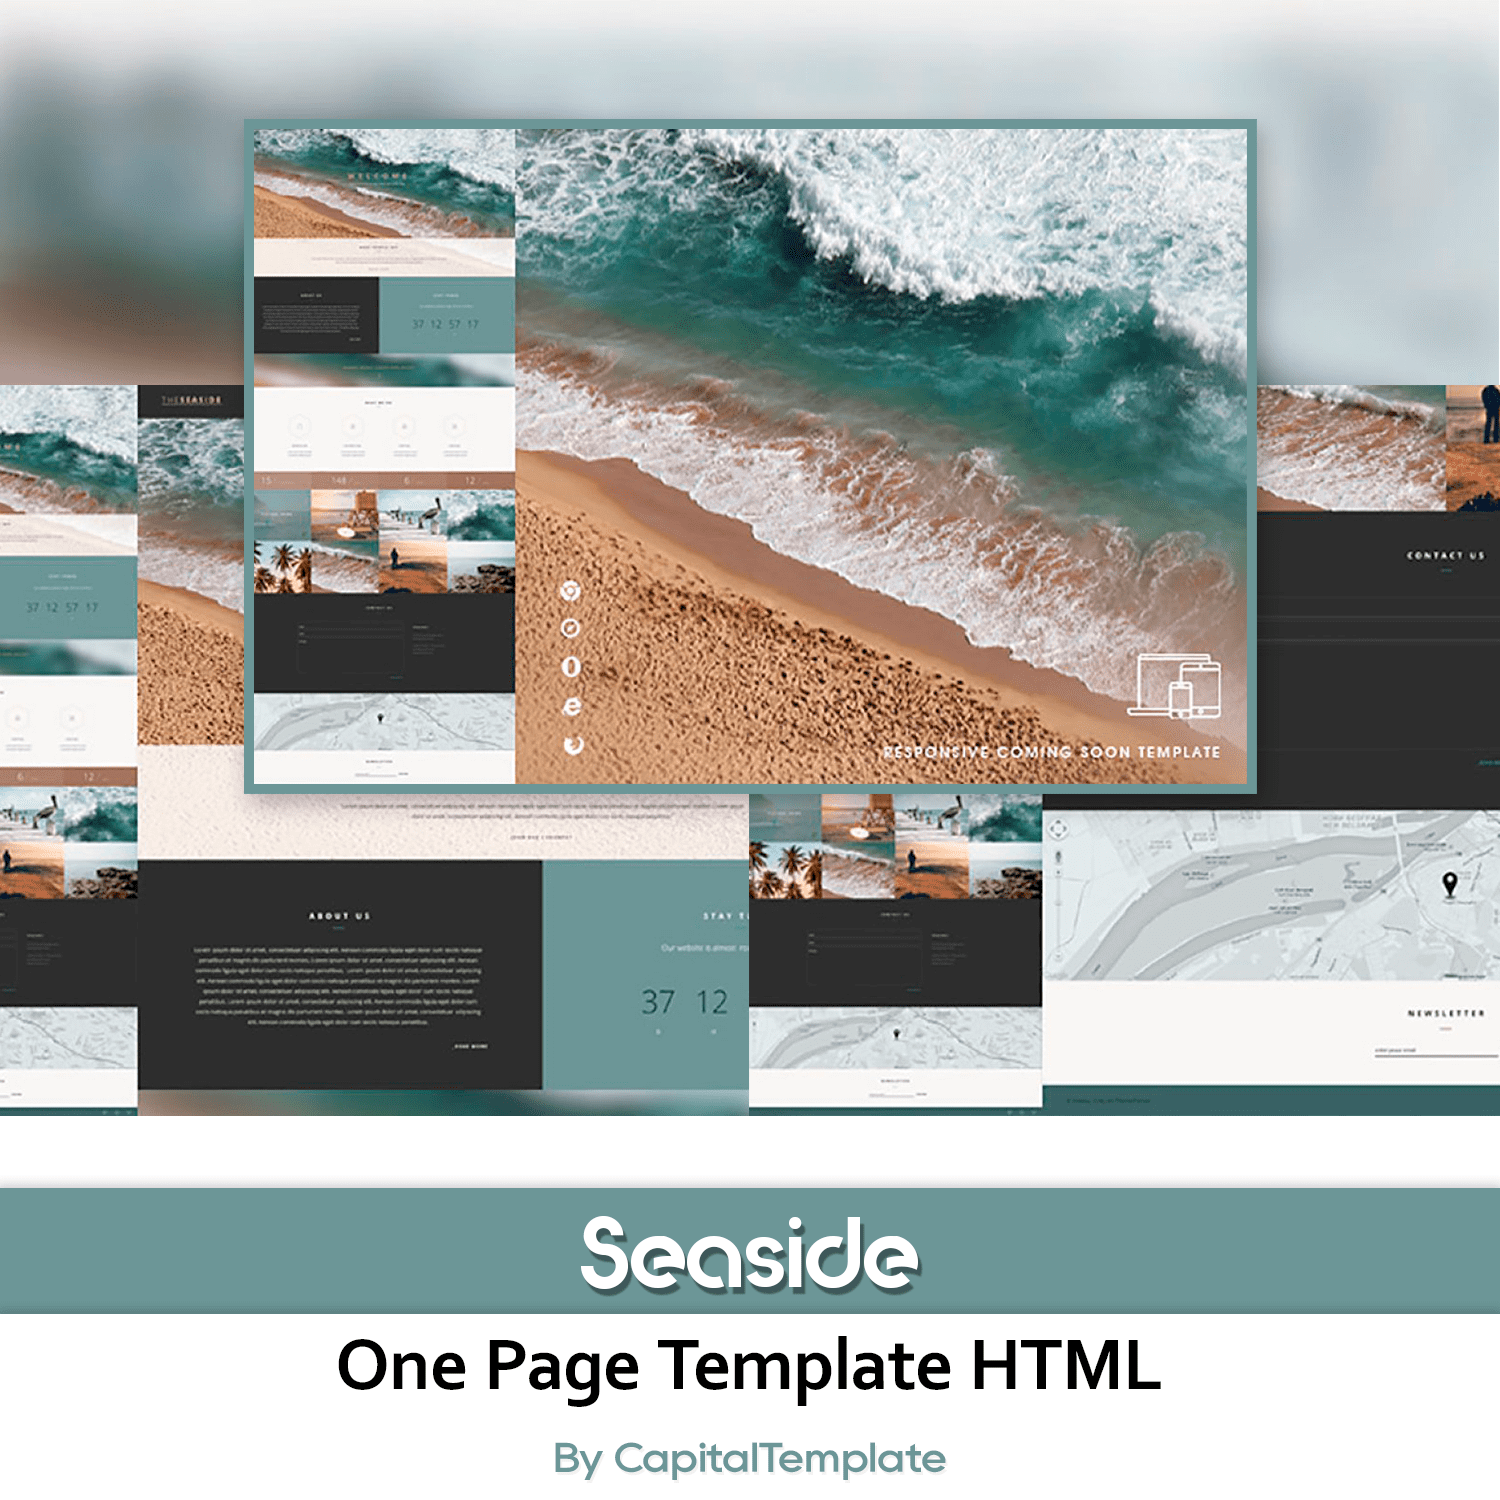 Seaside - One Page Template HTML cover.